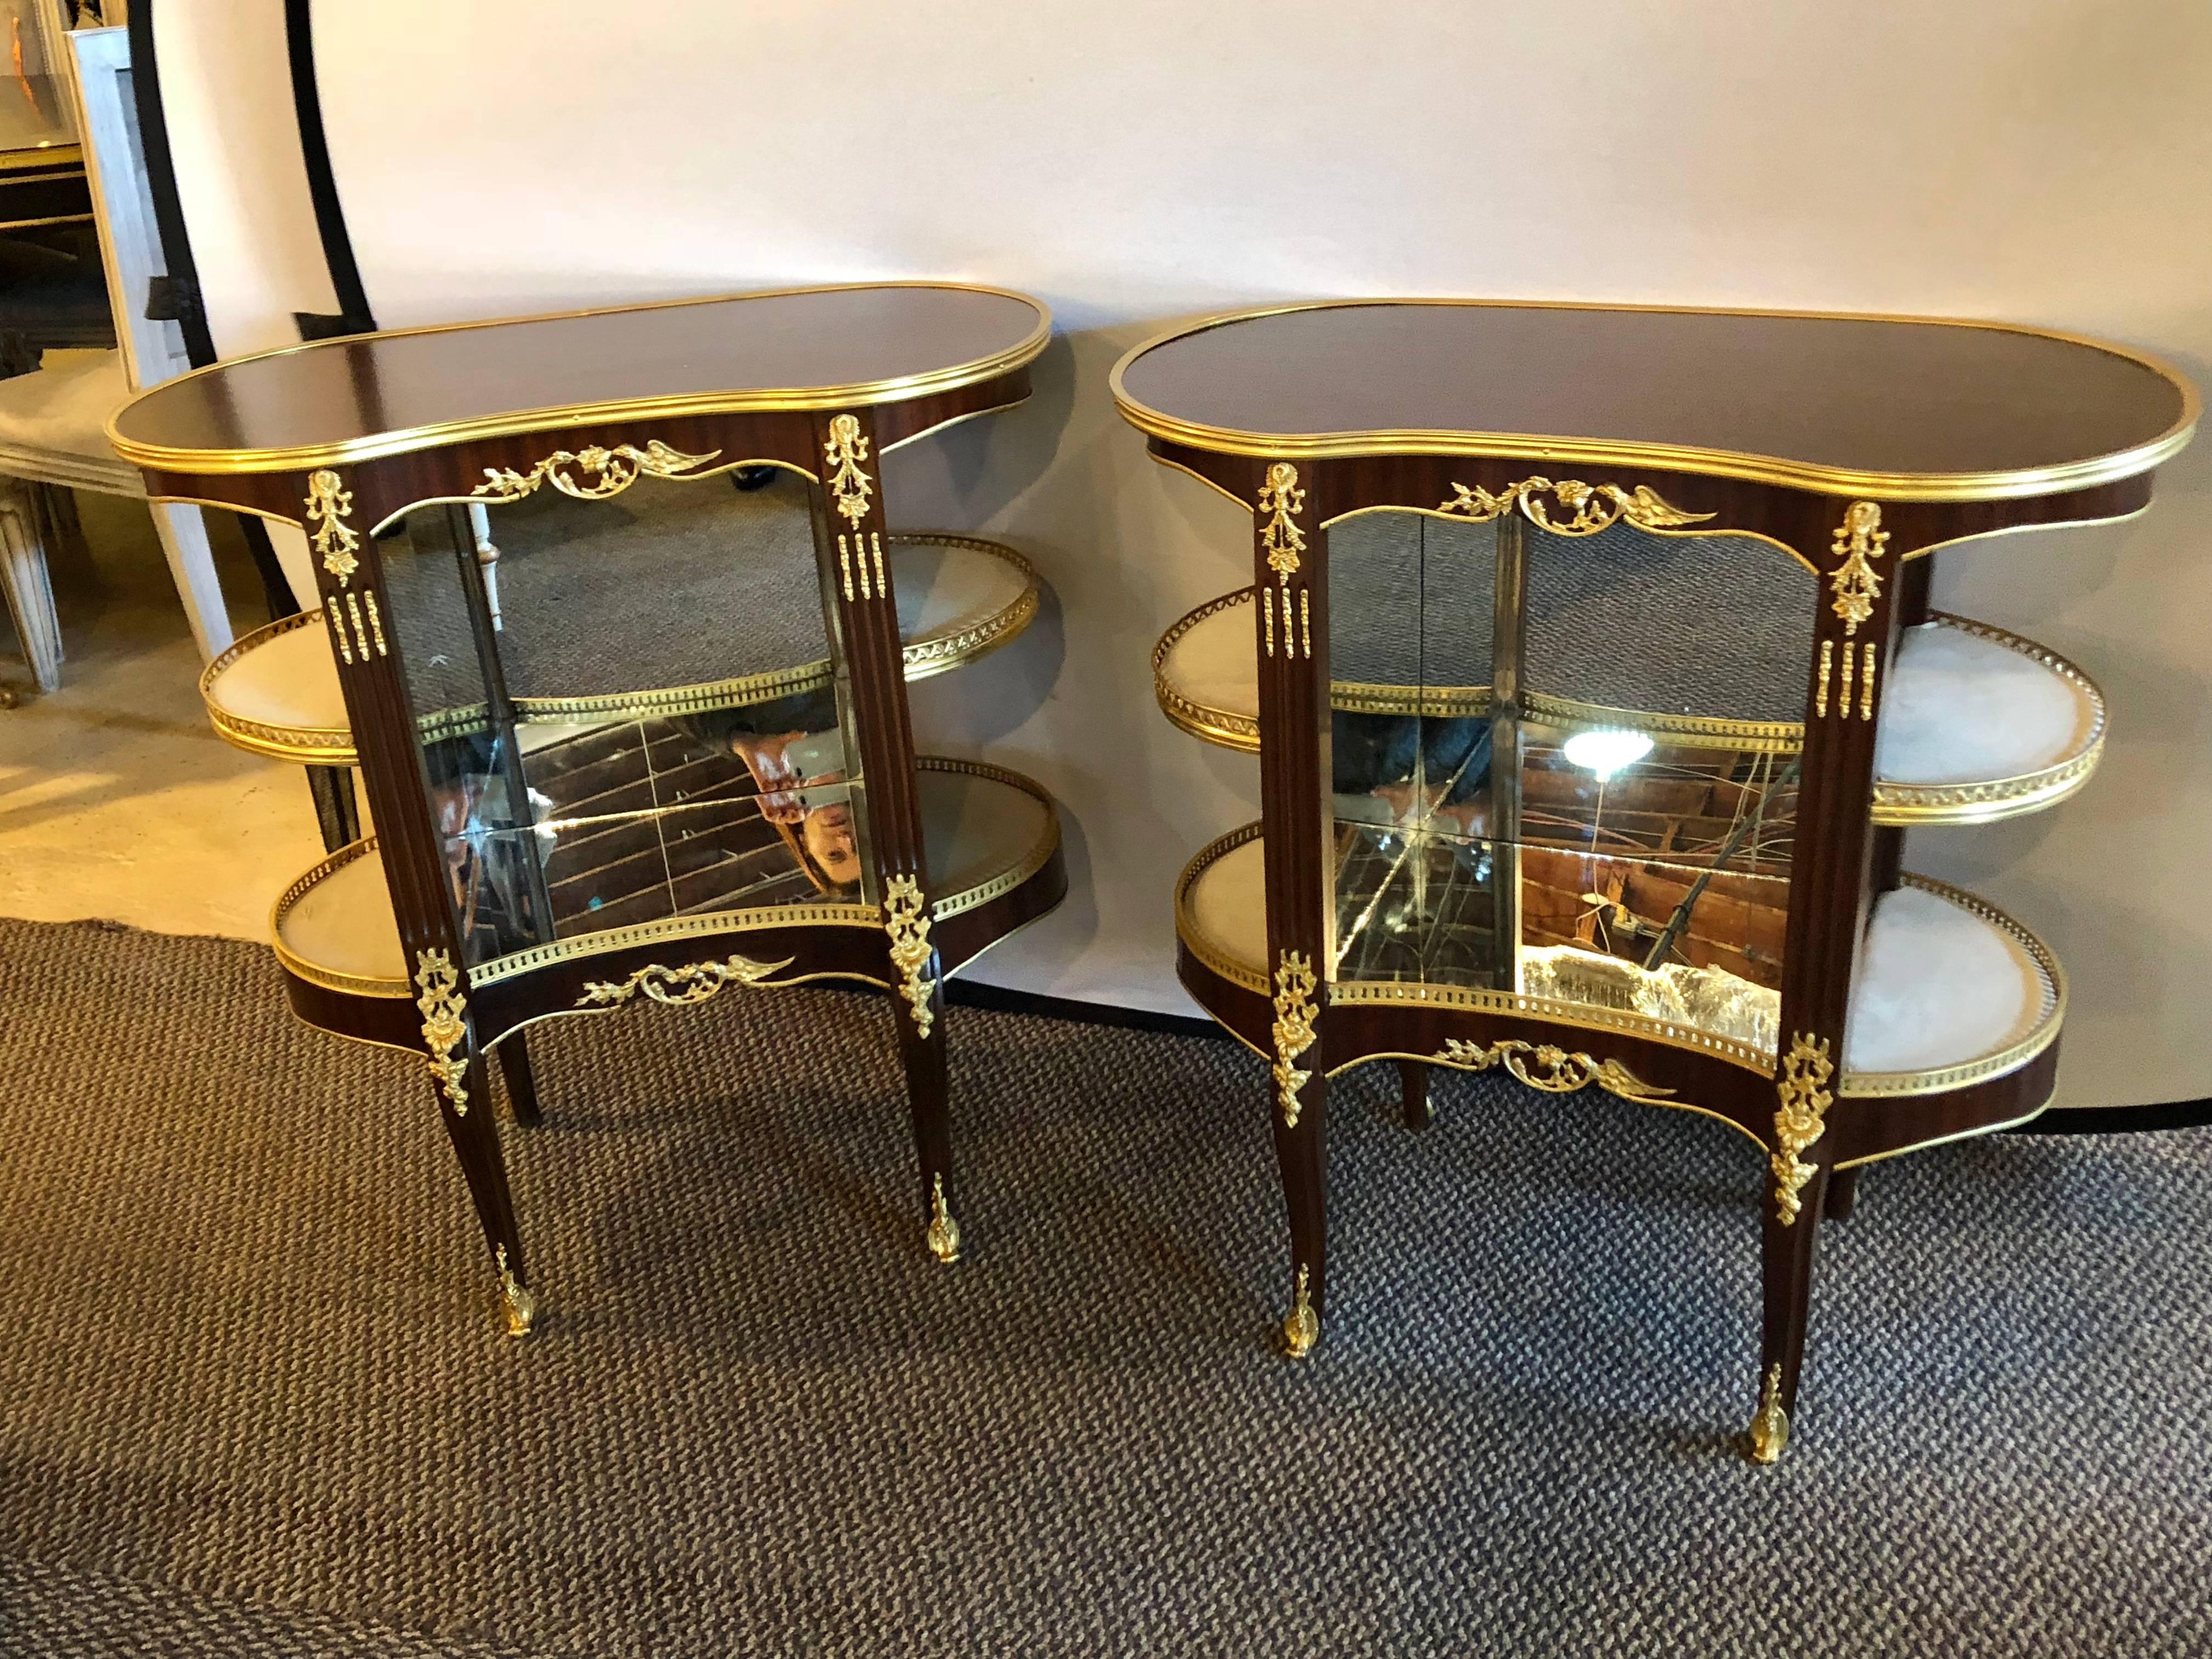 A very fine and decorative pair of Louis XV Hollywood Recency style crotch mahogany vitrine form end tables or nightstands. These custom quality nightstands can be used as end tables or showcase pieces in a vestibule. The bronze mounts are